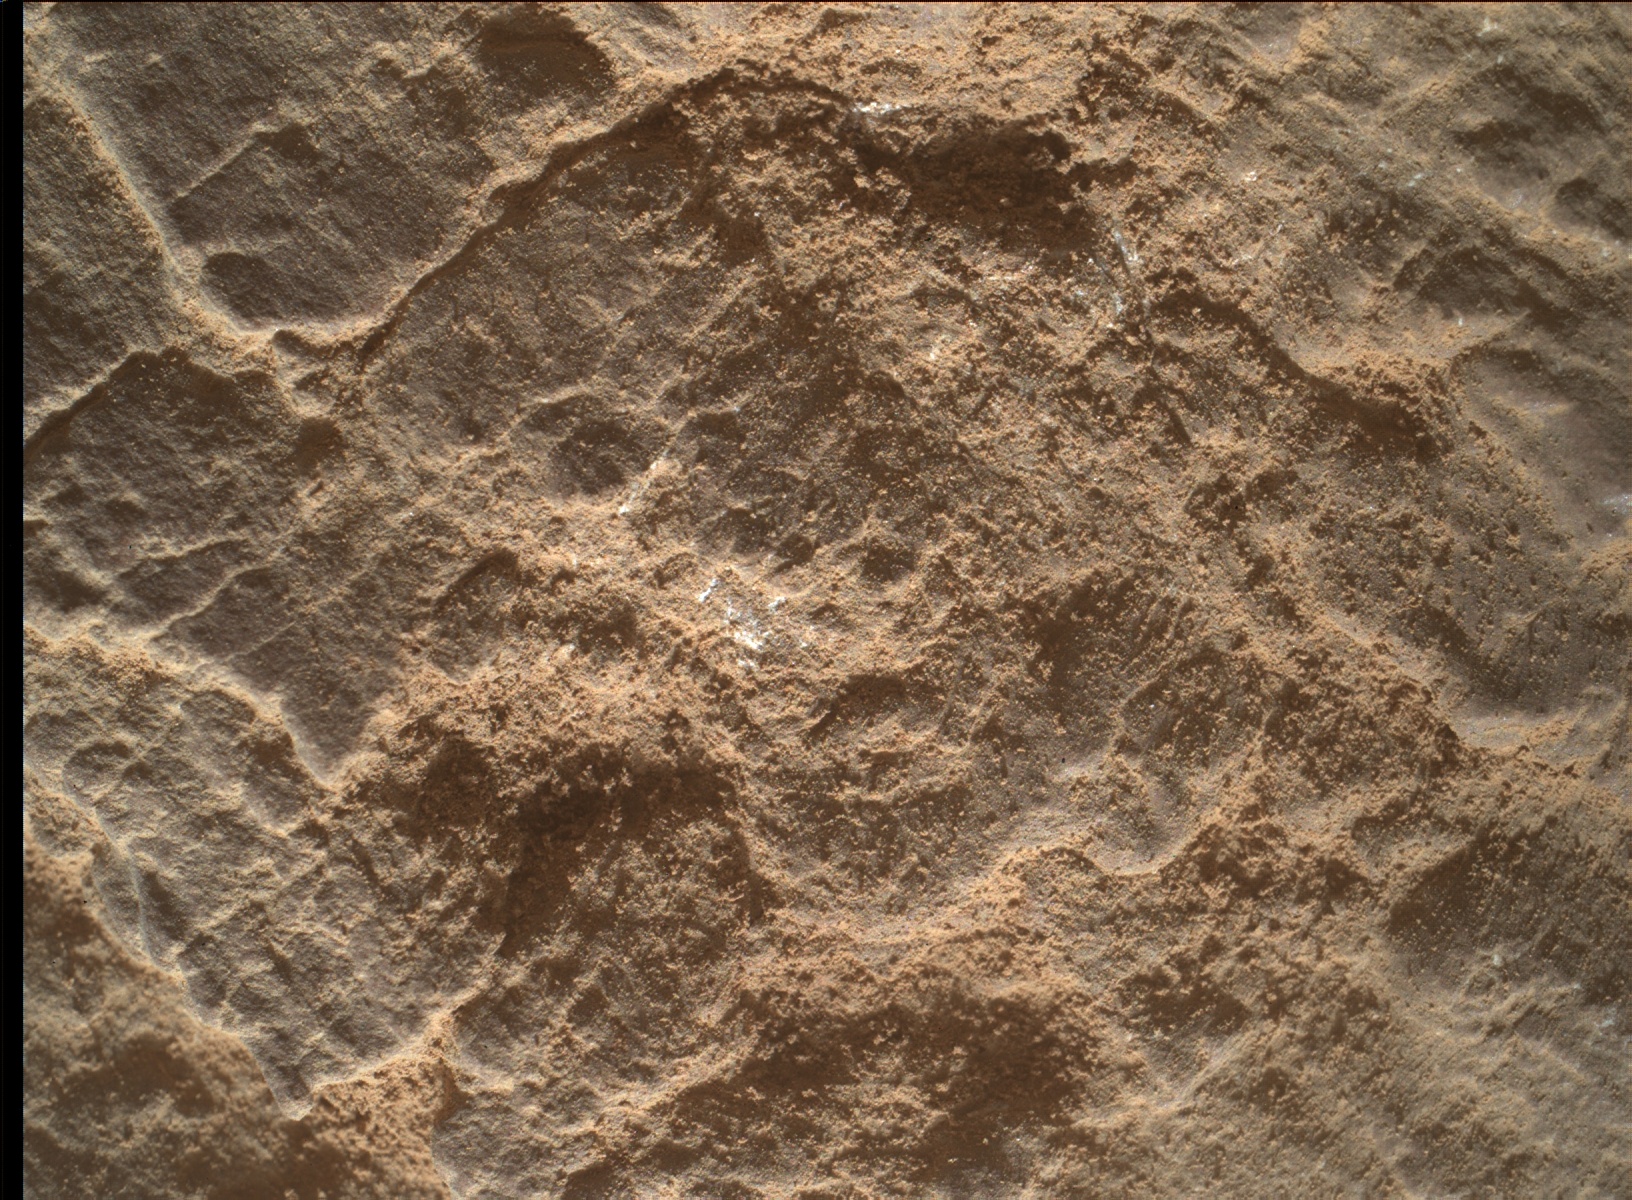 Nasa's Mars rover Curiosity acquired this image using its Mars Hand Lens Imager (MAHLI) on Sol 2483